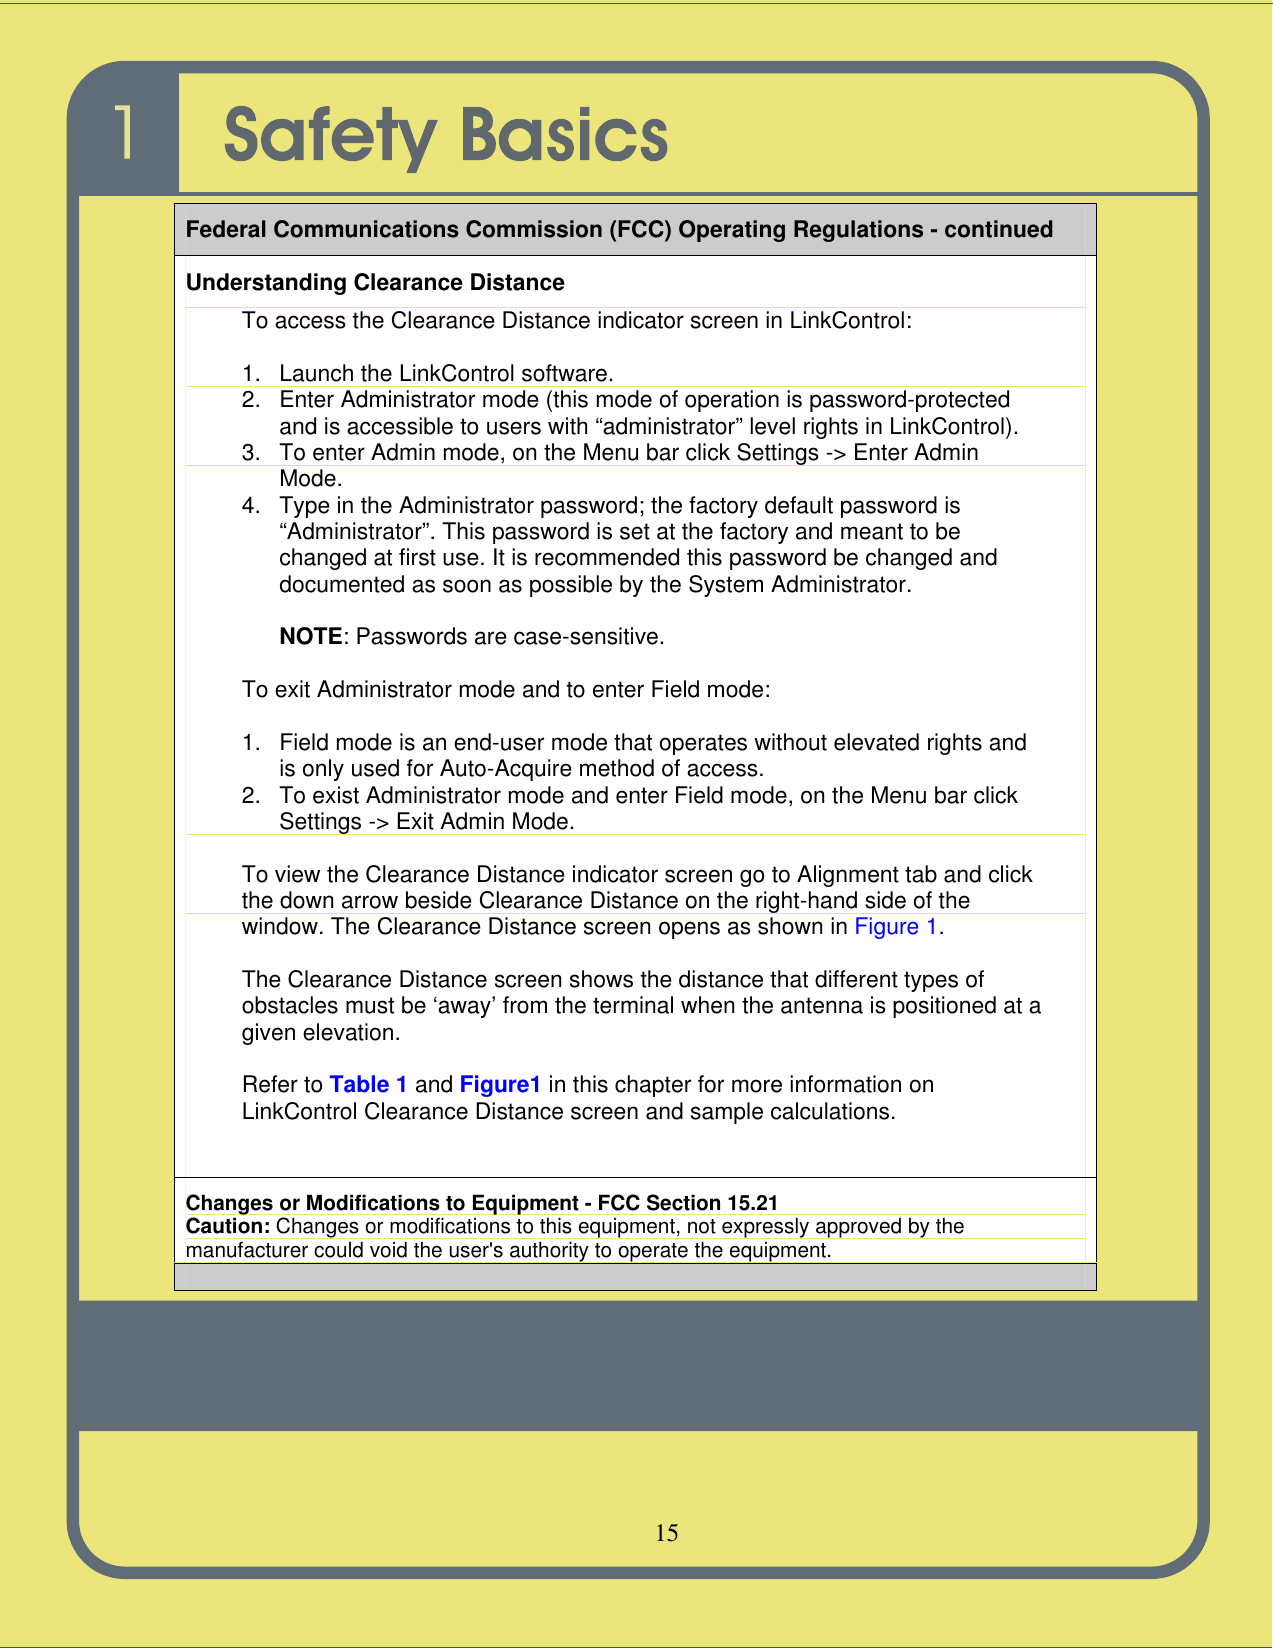   15   Federal Communications Commission (FCC) Operating Regulations - continued Understanding Clearance Distance To access the Clearance Distance indicator screen in LinkControl:  1. Launch the LinkControl software. 2. Enter Administrator mode (this mode of operation is password-protected and is accessible to users with “administrator” level rights in LinkControl). 3. To enter Admin mode, on the Menu bar click Settings -&gt; Enter Admin Mode. 4. Type in the Administrator password; the factory default password is “Administrator”. This password is set at the factory and meant to be changed at first use. It is recommended this password be changed and documented as soon as possible by the System Administrator.  NOTE: Passwords are case-sensitive.  To exit Administrator mode and to enter Field mode:  1. Field mode is an end-user mode that operates without elevated rights and is only used for Auto-Acquire method of access. 2. To exist Administrator mode and enter Field mode, on the Menu bar click Settings -&gt; Exit Admin Mode.  To view the Clearance Distance indicator screen go to Alignment tab and click the down arrow beside Clearance Distance on the right-hand side of the window. The Clearance Distance screen opens as shown in Figure 1.  The Clearance Distance screen shows the distance that different types of obstacles must be ‘away’ from the terminal when the antenna is positioned at a given elevation.  Refer to Table 1 and Figure1 in this chapter for more information on LinkControl Clearance Distance screen and sample calculations.   Changes or Modifications to Equipment - FCC Section 15.21 Caution: Changes or modifications to this equipment, not expressly approved by the manufacturer could void the user&apos;s authority to operate the equipment.  